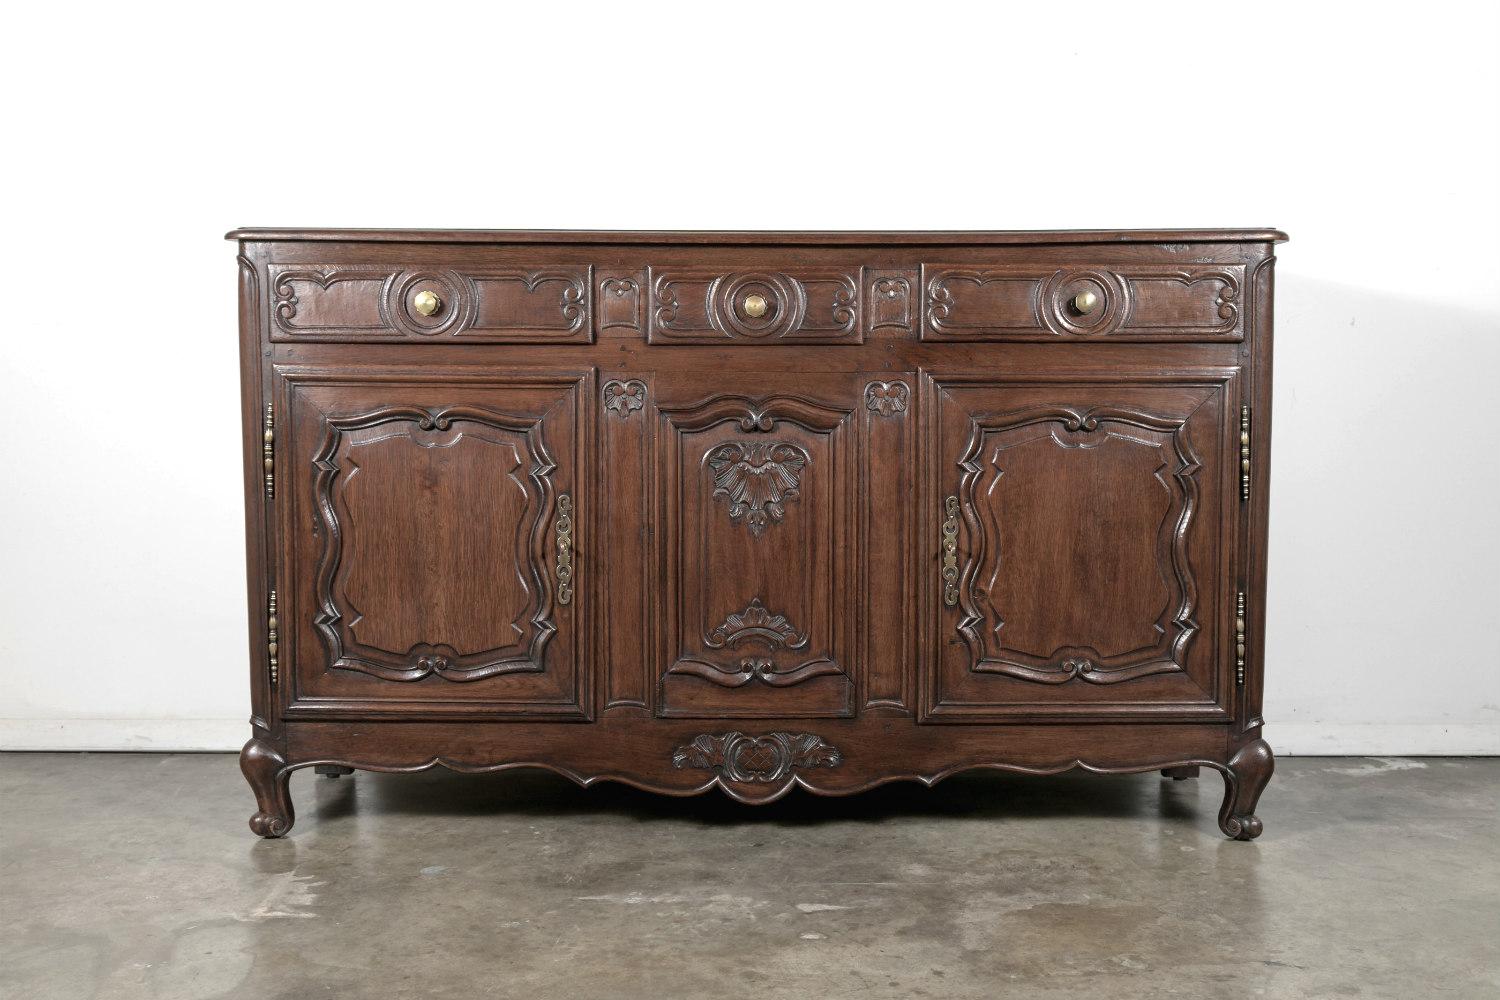 Stunning early 19th century French Provençal Louis XV style enfilade, handcrafted in solid oak by talented artisans near Avignon. This beautifully carved buffet has three carved drawers over two molded paneled doors with S-scrolls that open to